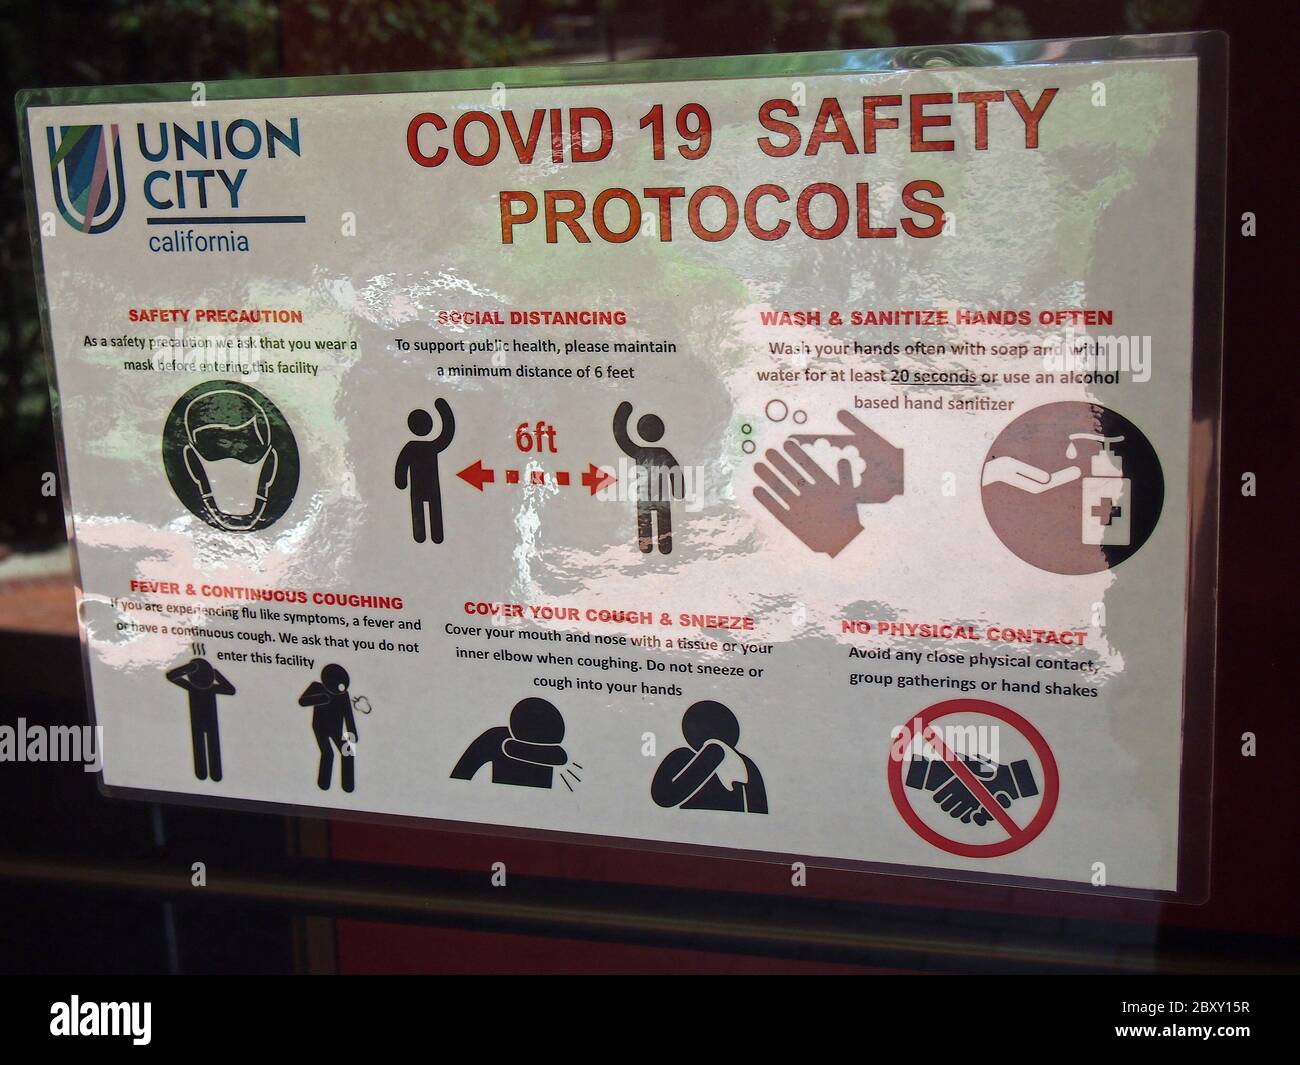 Union city Covid-19 safety protocols sign at a retail store entrance, California, Stock Photo